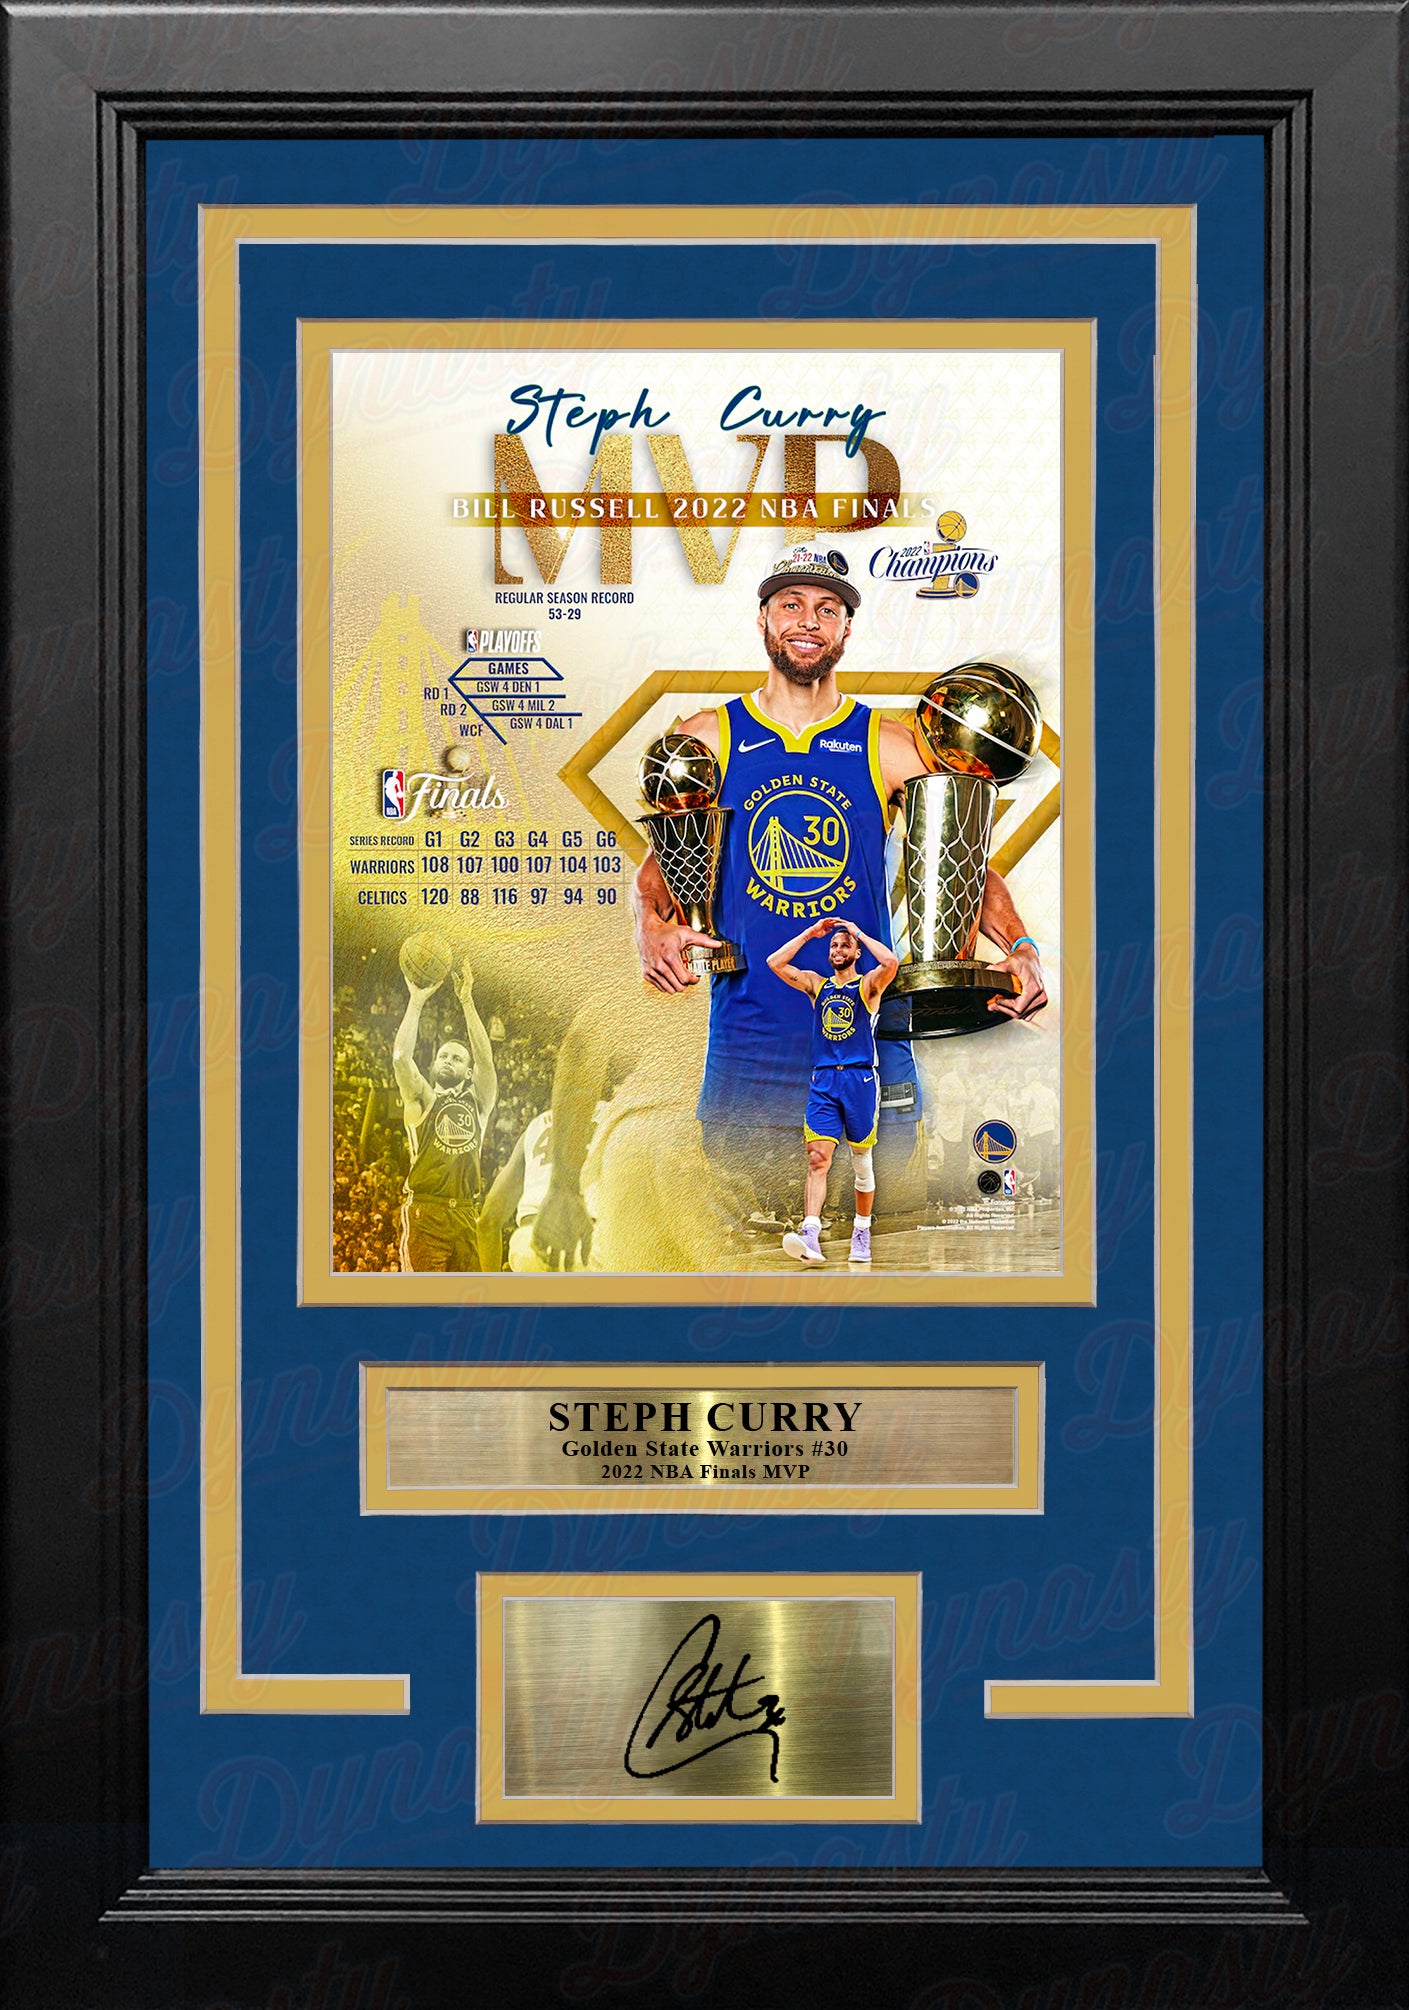 Steph Curry Golden State Warriors 2022 Finals MVP 8x10 Framed Collage Photo with Engraved Autograph - Dynasty Sports & Framing 